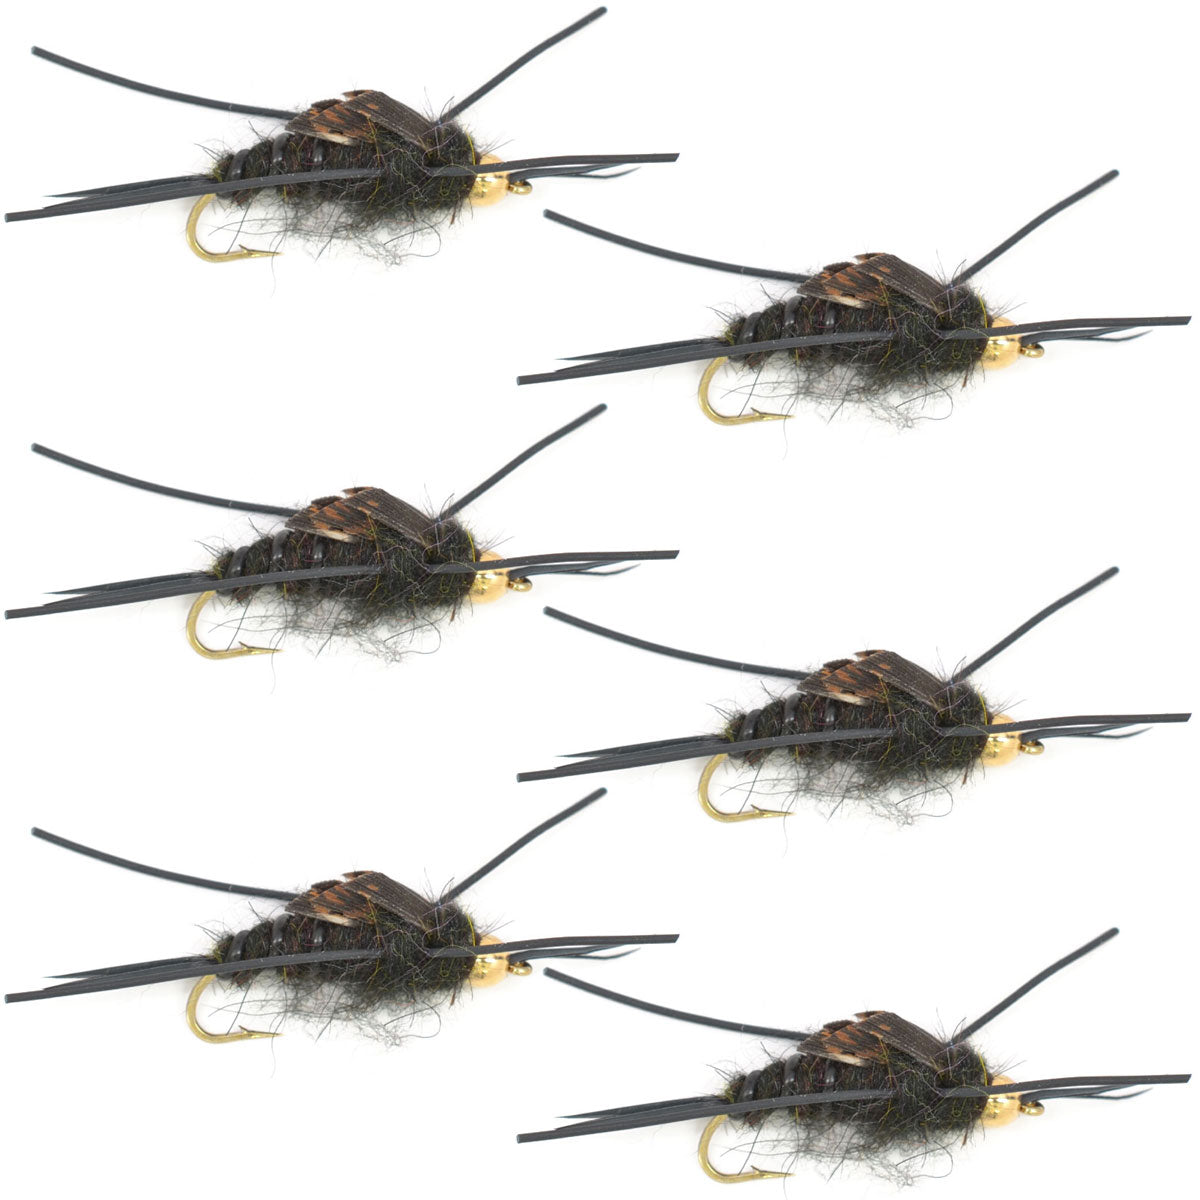 Tungsten Bead Kaufmann's Black Stone Fly with Rubber Legs - Stonefly Wet Fly - 6 Flies Hook Size 8